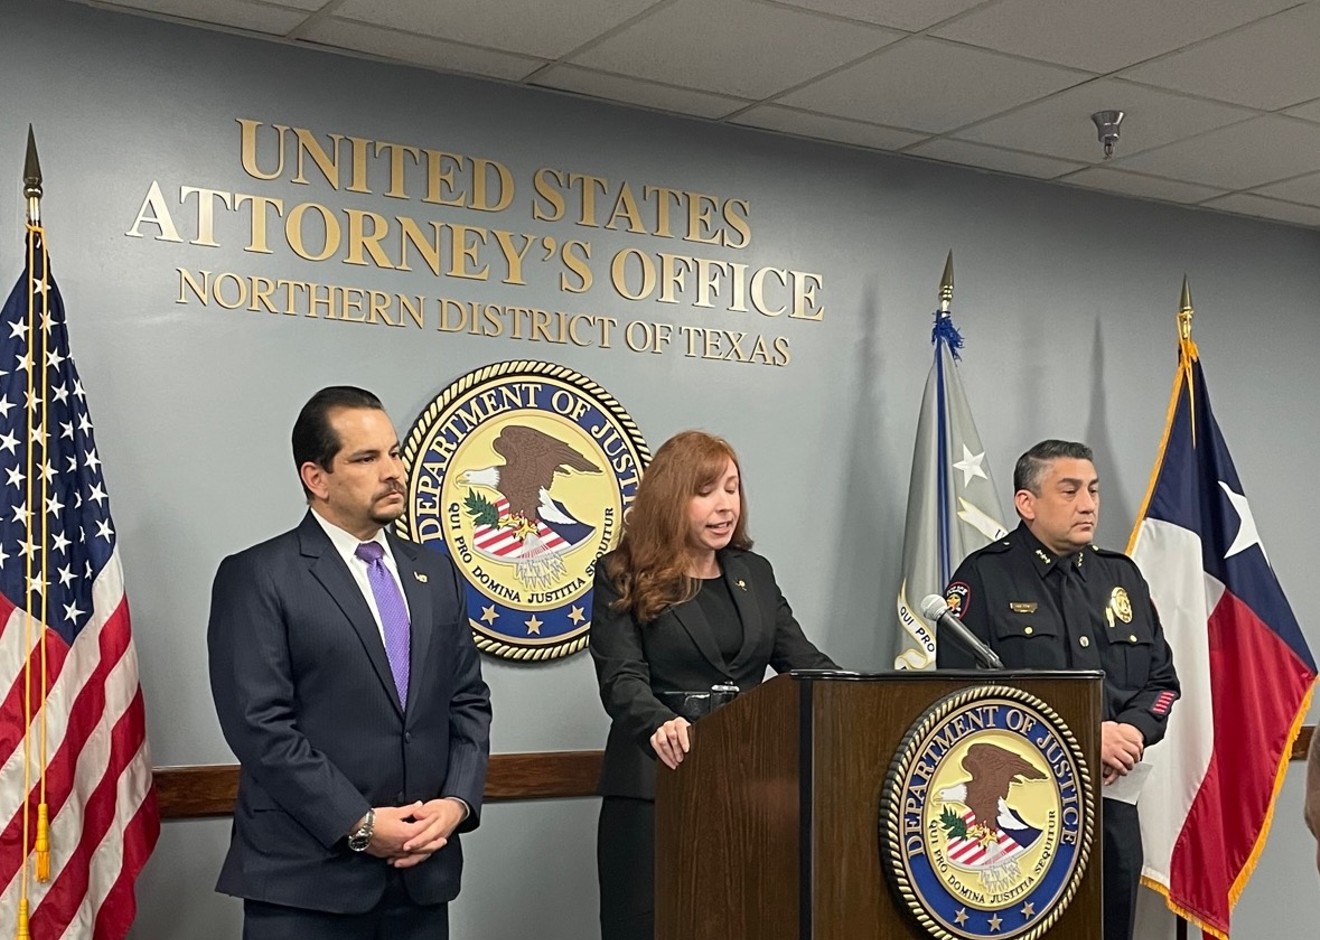 U.S. Attorney Leigha Simonton discusses an arrest related to a recent spate of overdose deaths among teens in Carrollton.